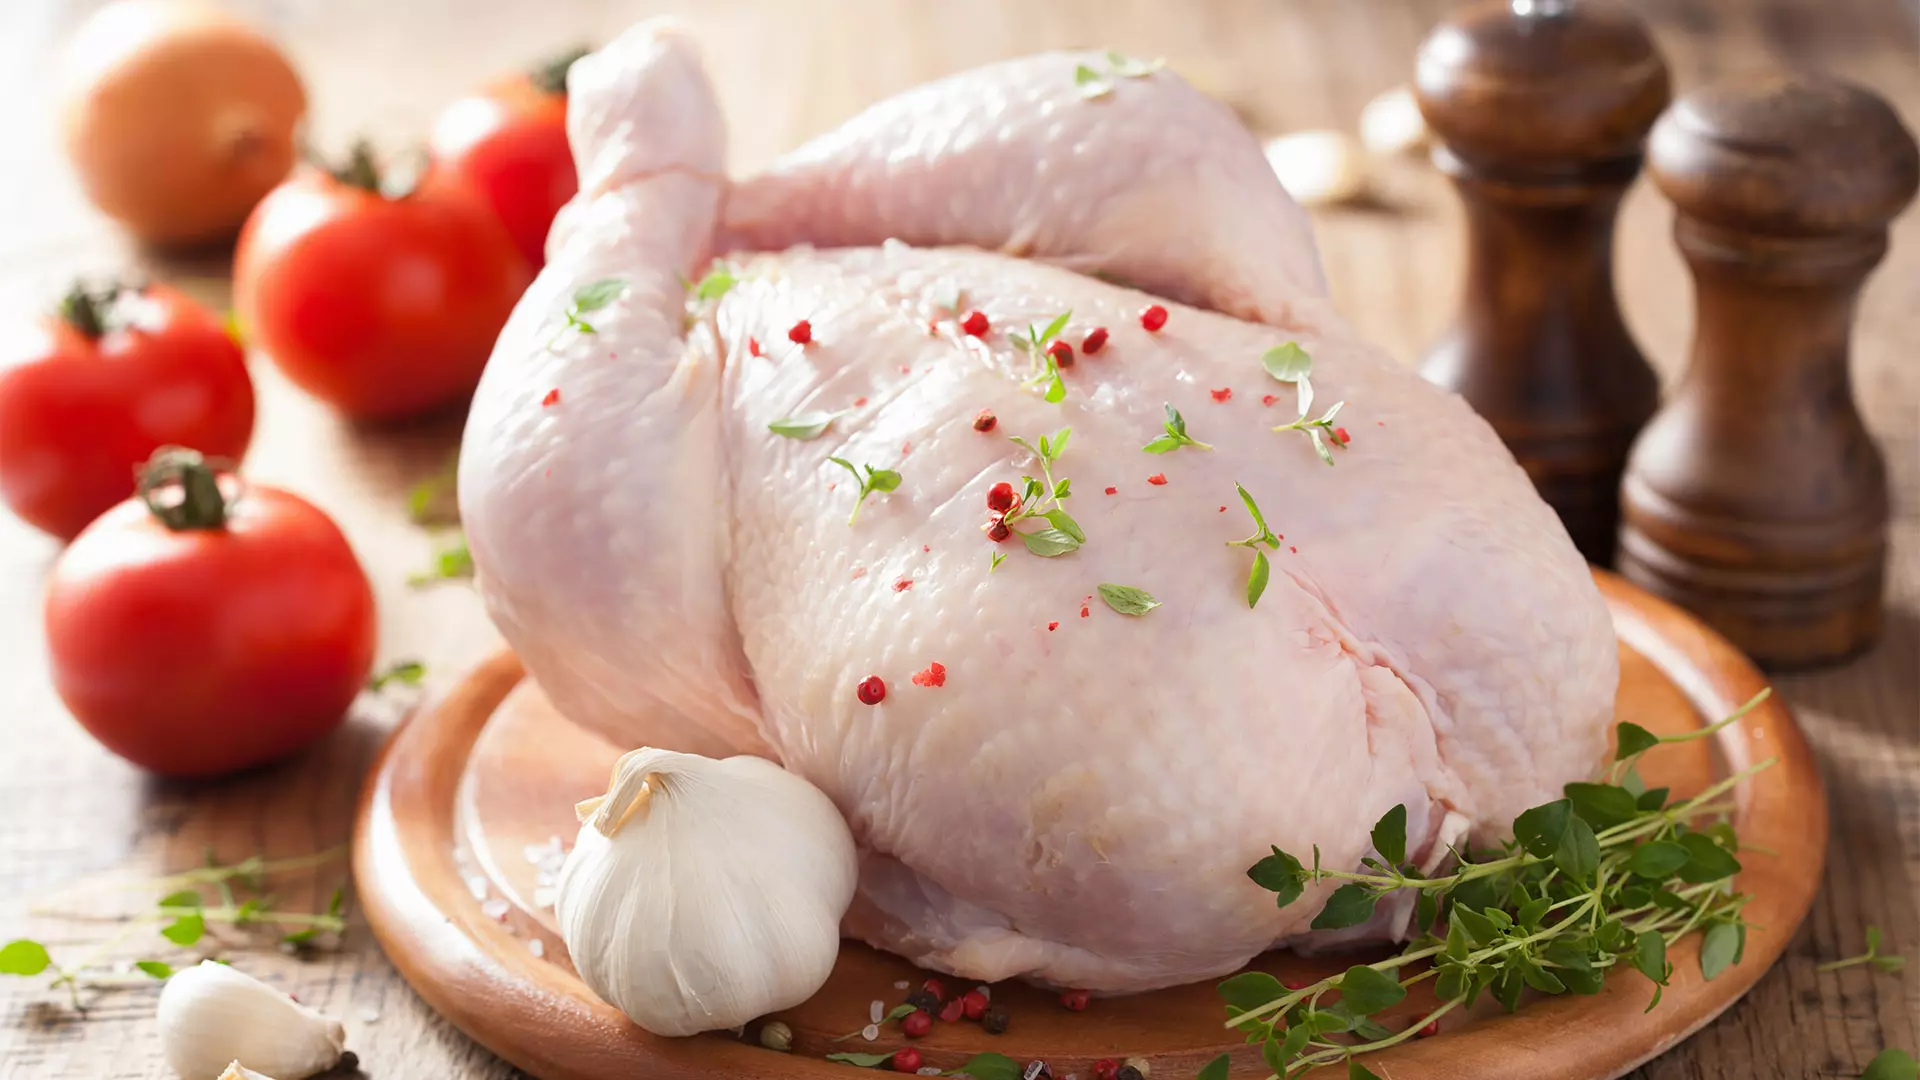 How long to boil a whole chicken?